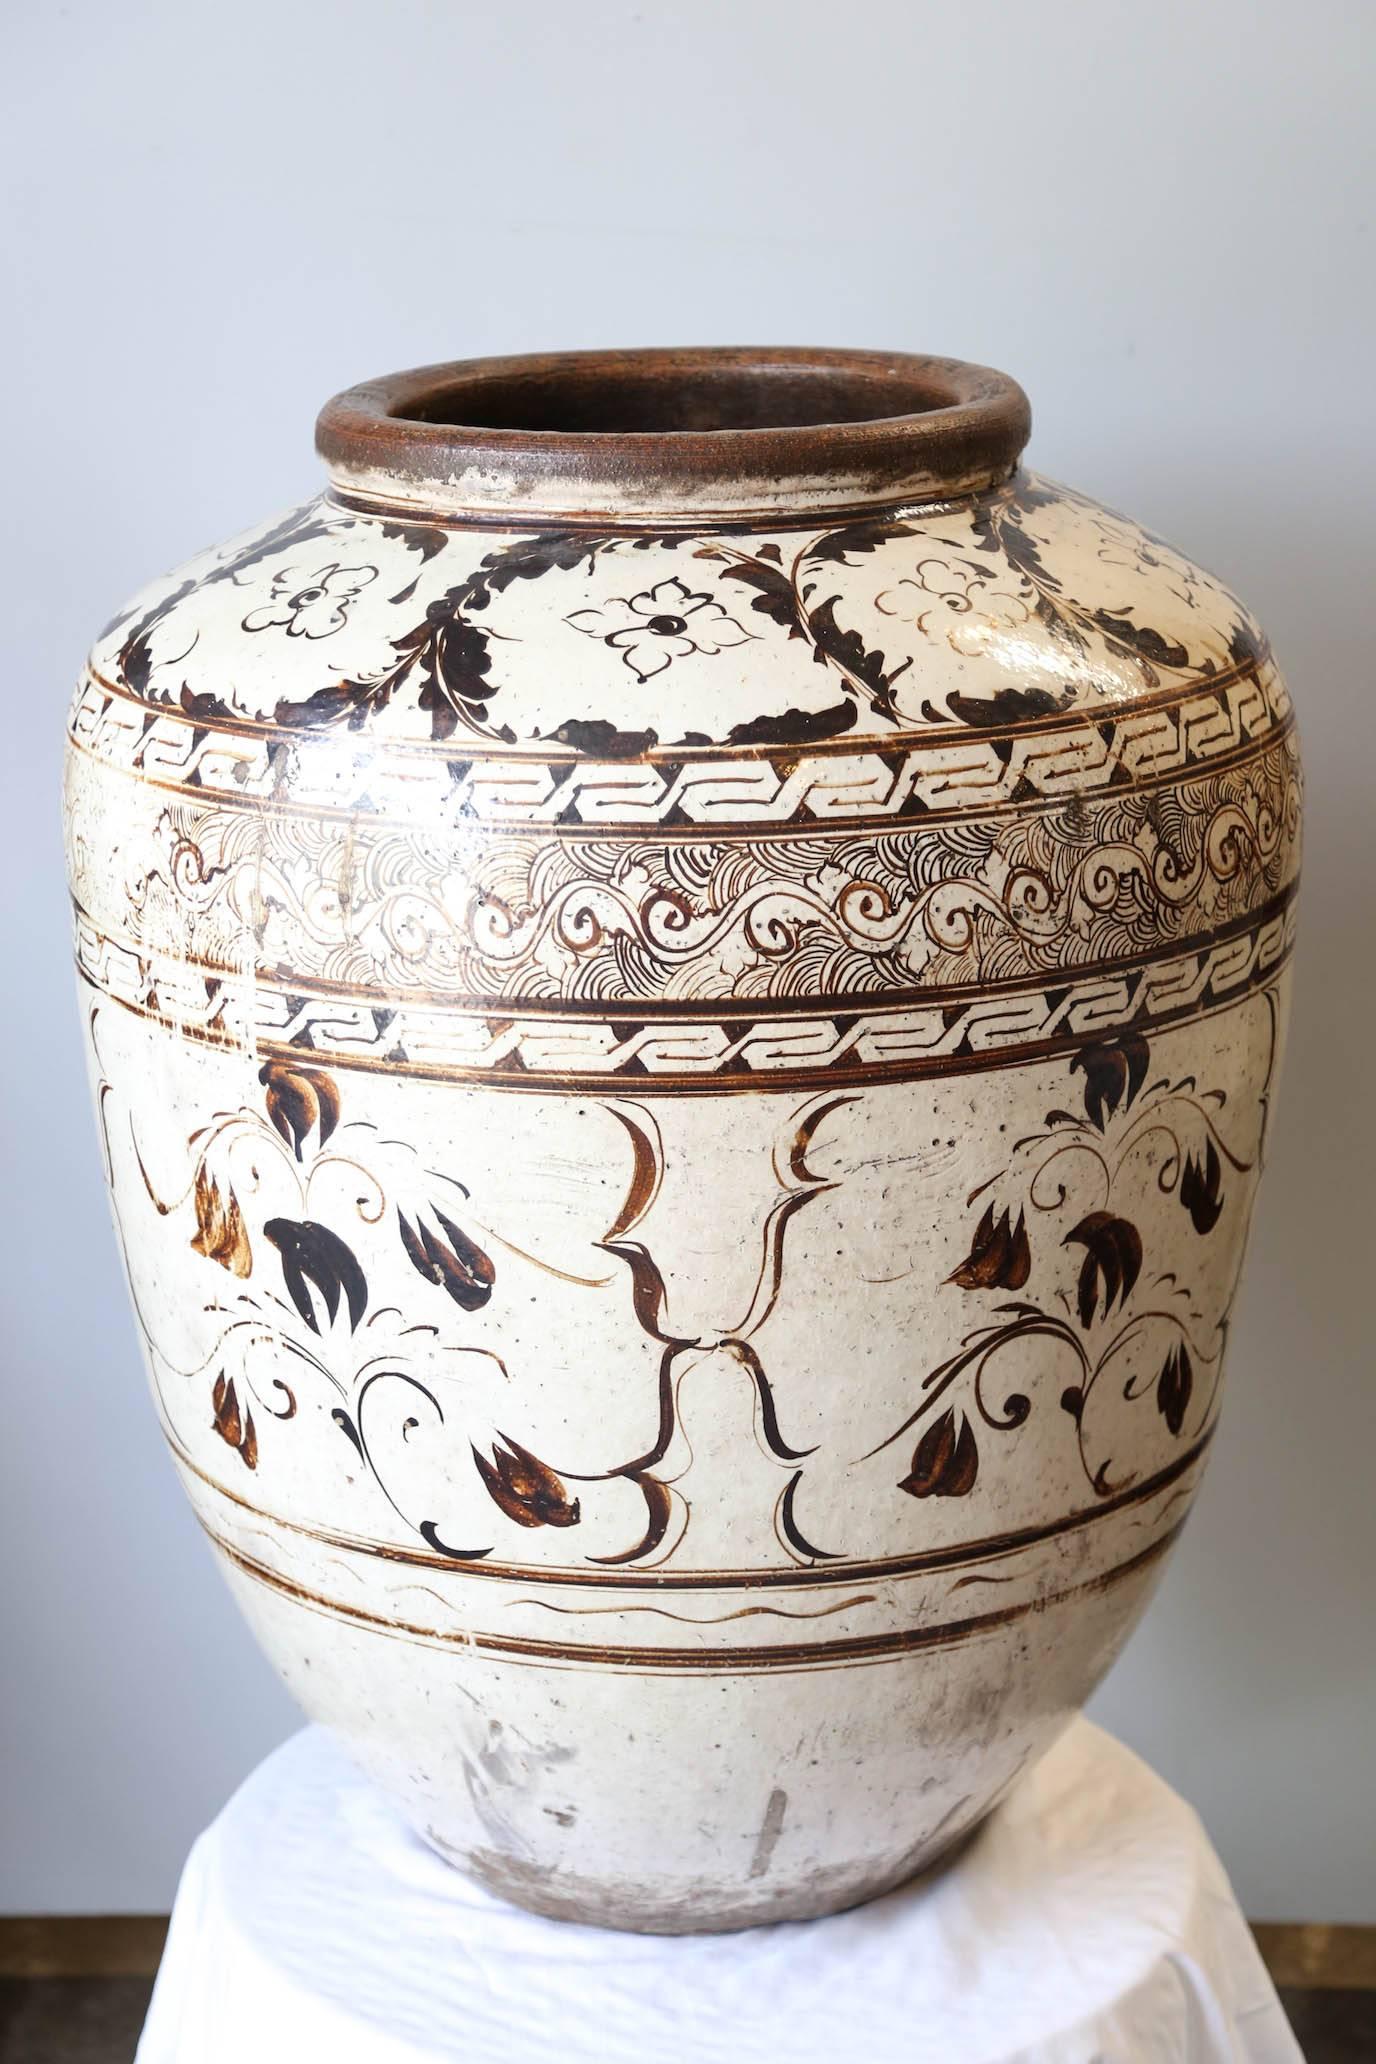 Painted Over sized Chinese Ming Dynasty Cizhou Ware Ceramic Jar